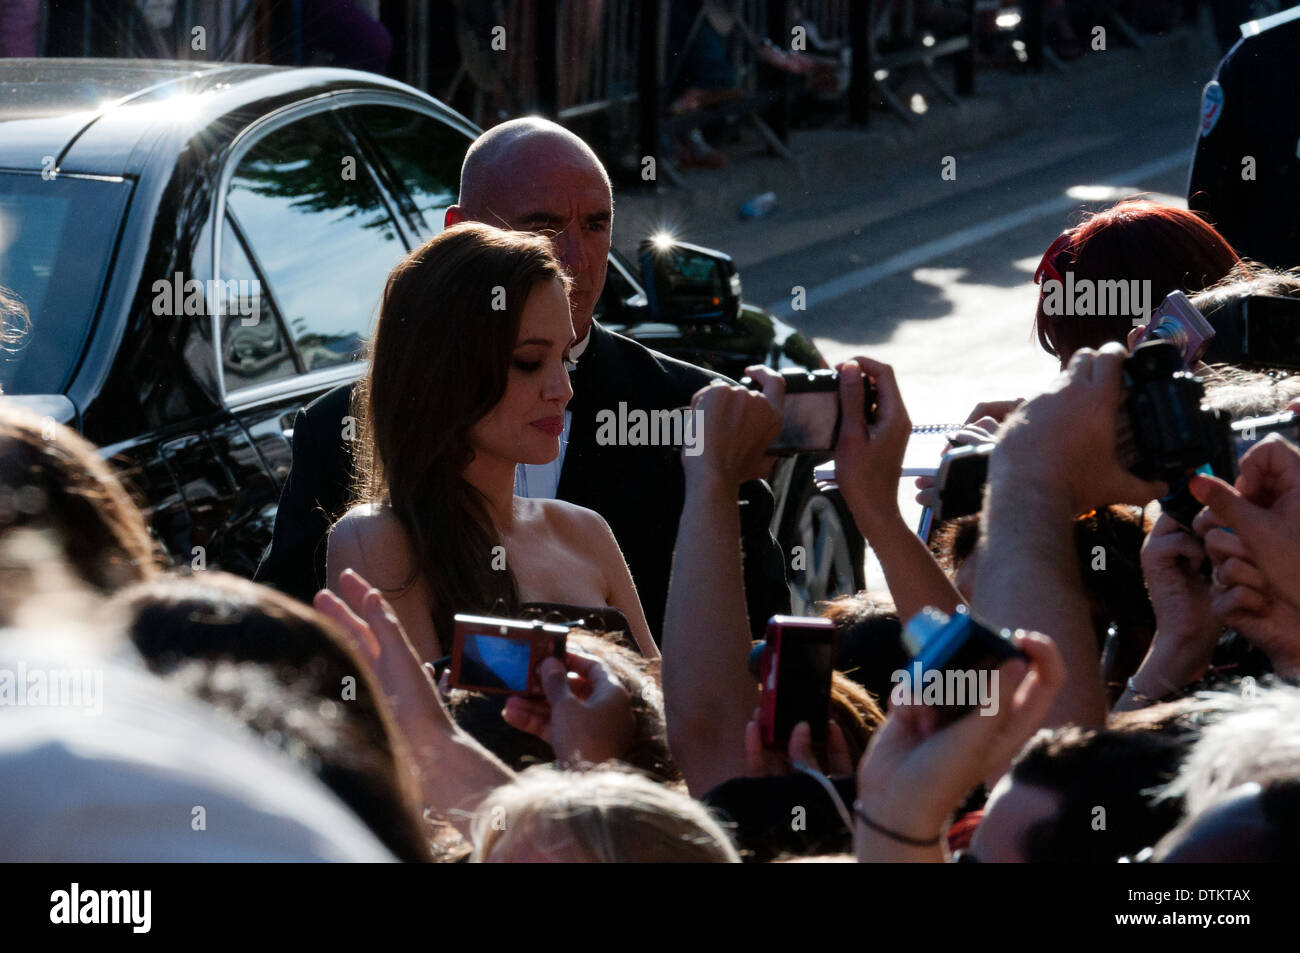 Europe, France, Alpes-Maritimes, Cannes film festival. The actress Angelina Jolie signing autographs. Stock Photo